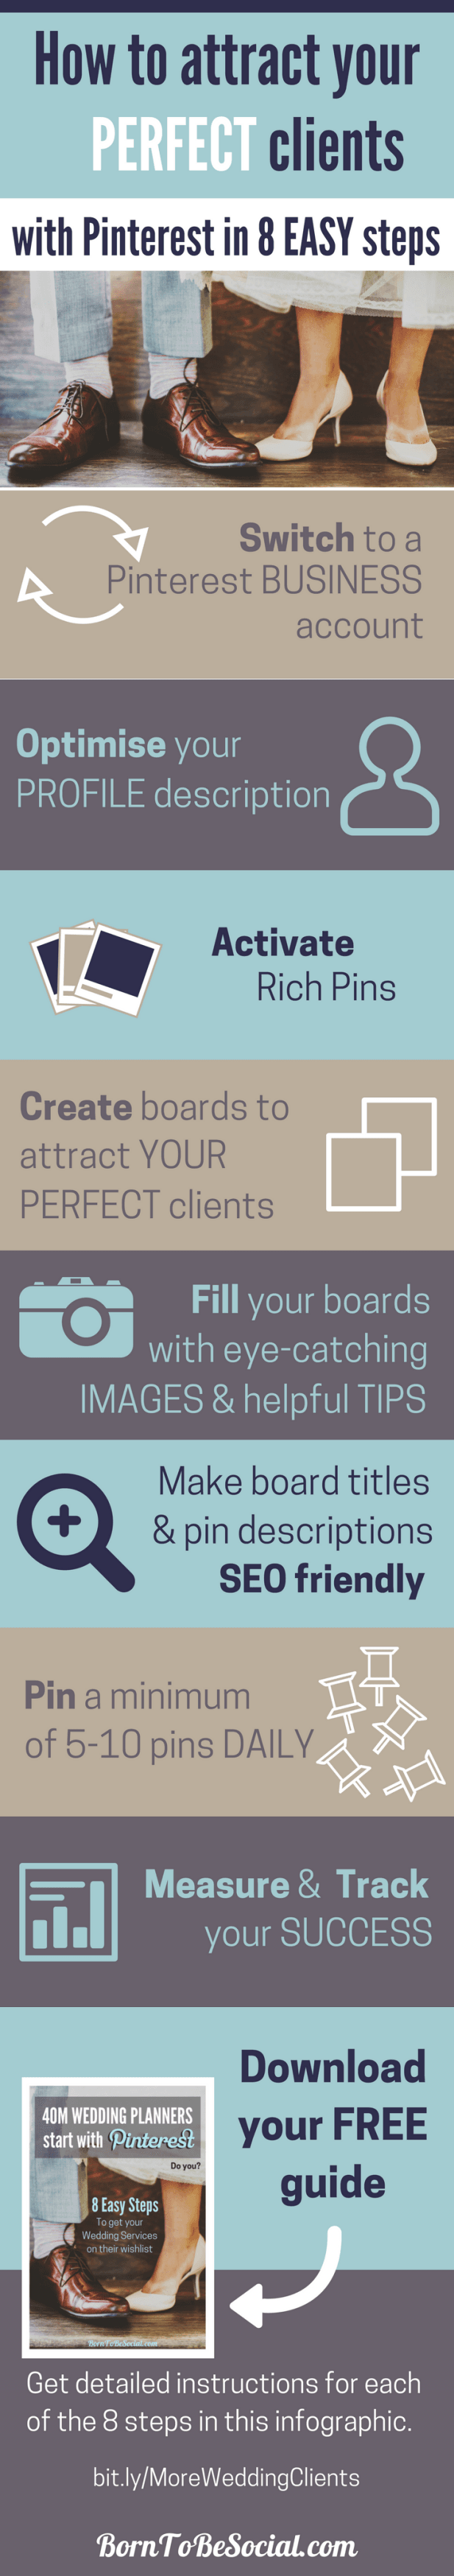 INFOGRAPHIC - HOW TO FIND WEDDING CLIENTS WITH PINTEREST for Hotel Wedding Venues, Wedding Planners & Photographers - 8-Step Checklist & Action Plan. Your perfect clients spend a LOT of time on Pinterest planning their perfect wedding and wedding reception, but are they finding their way to the wedding services on your website? |via @BornToBeSocial, Pinterest Marketing & Consulting